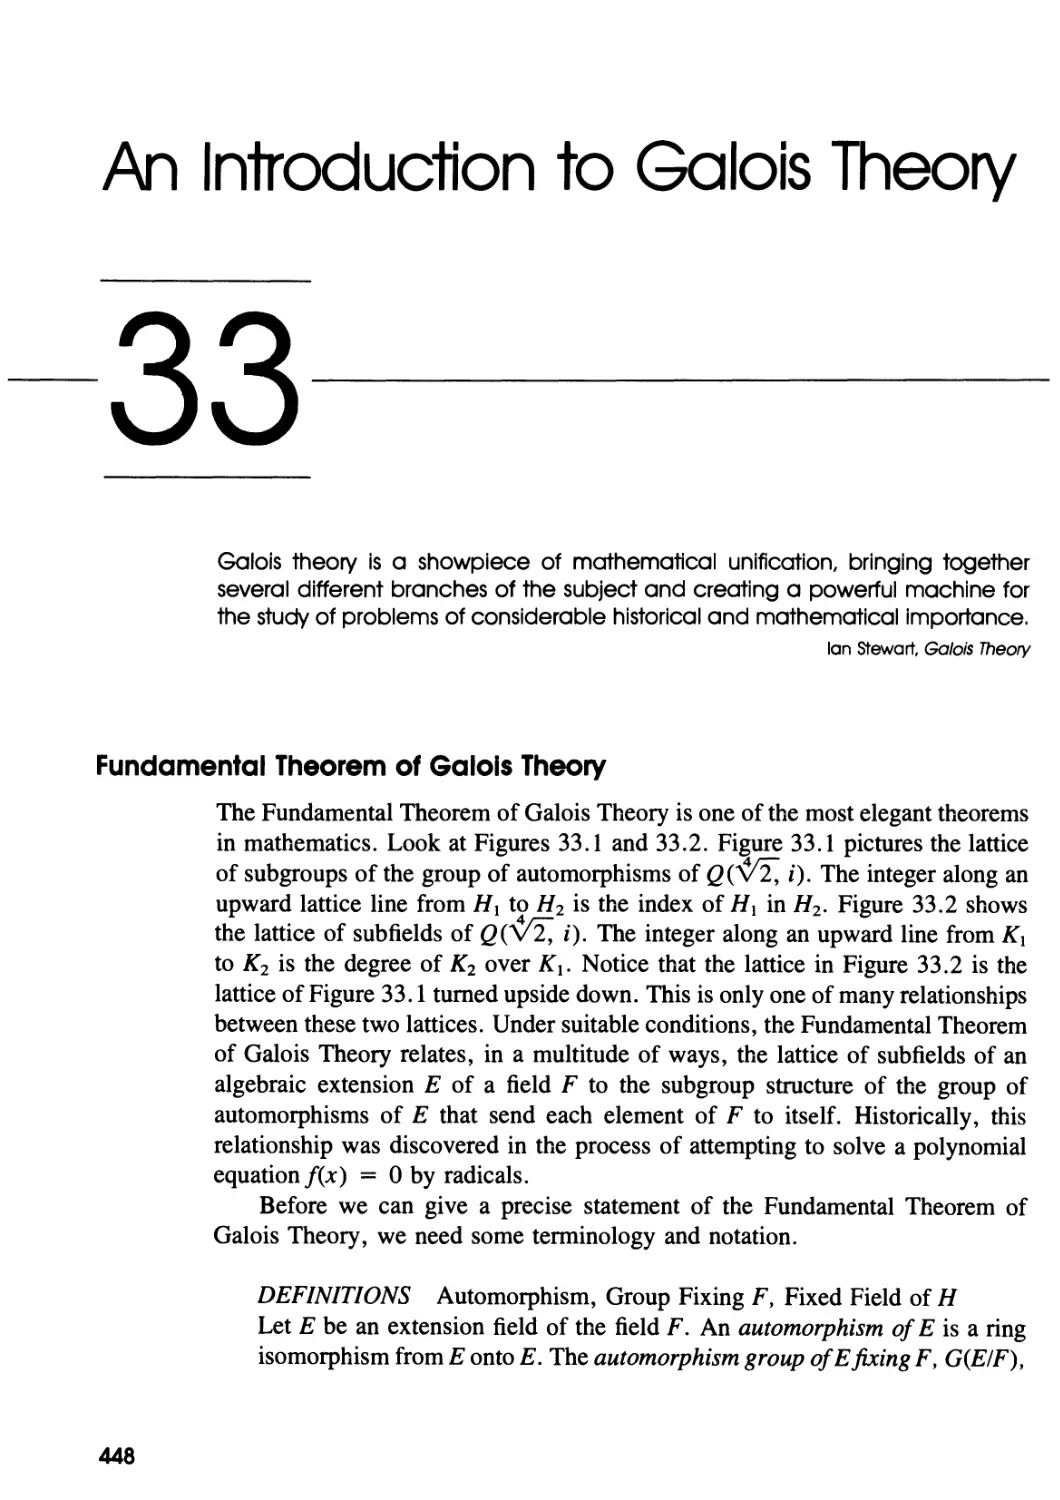 33 An Introduction to Galois Theory